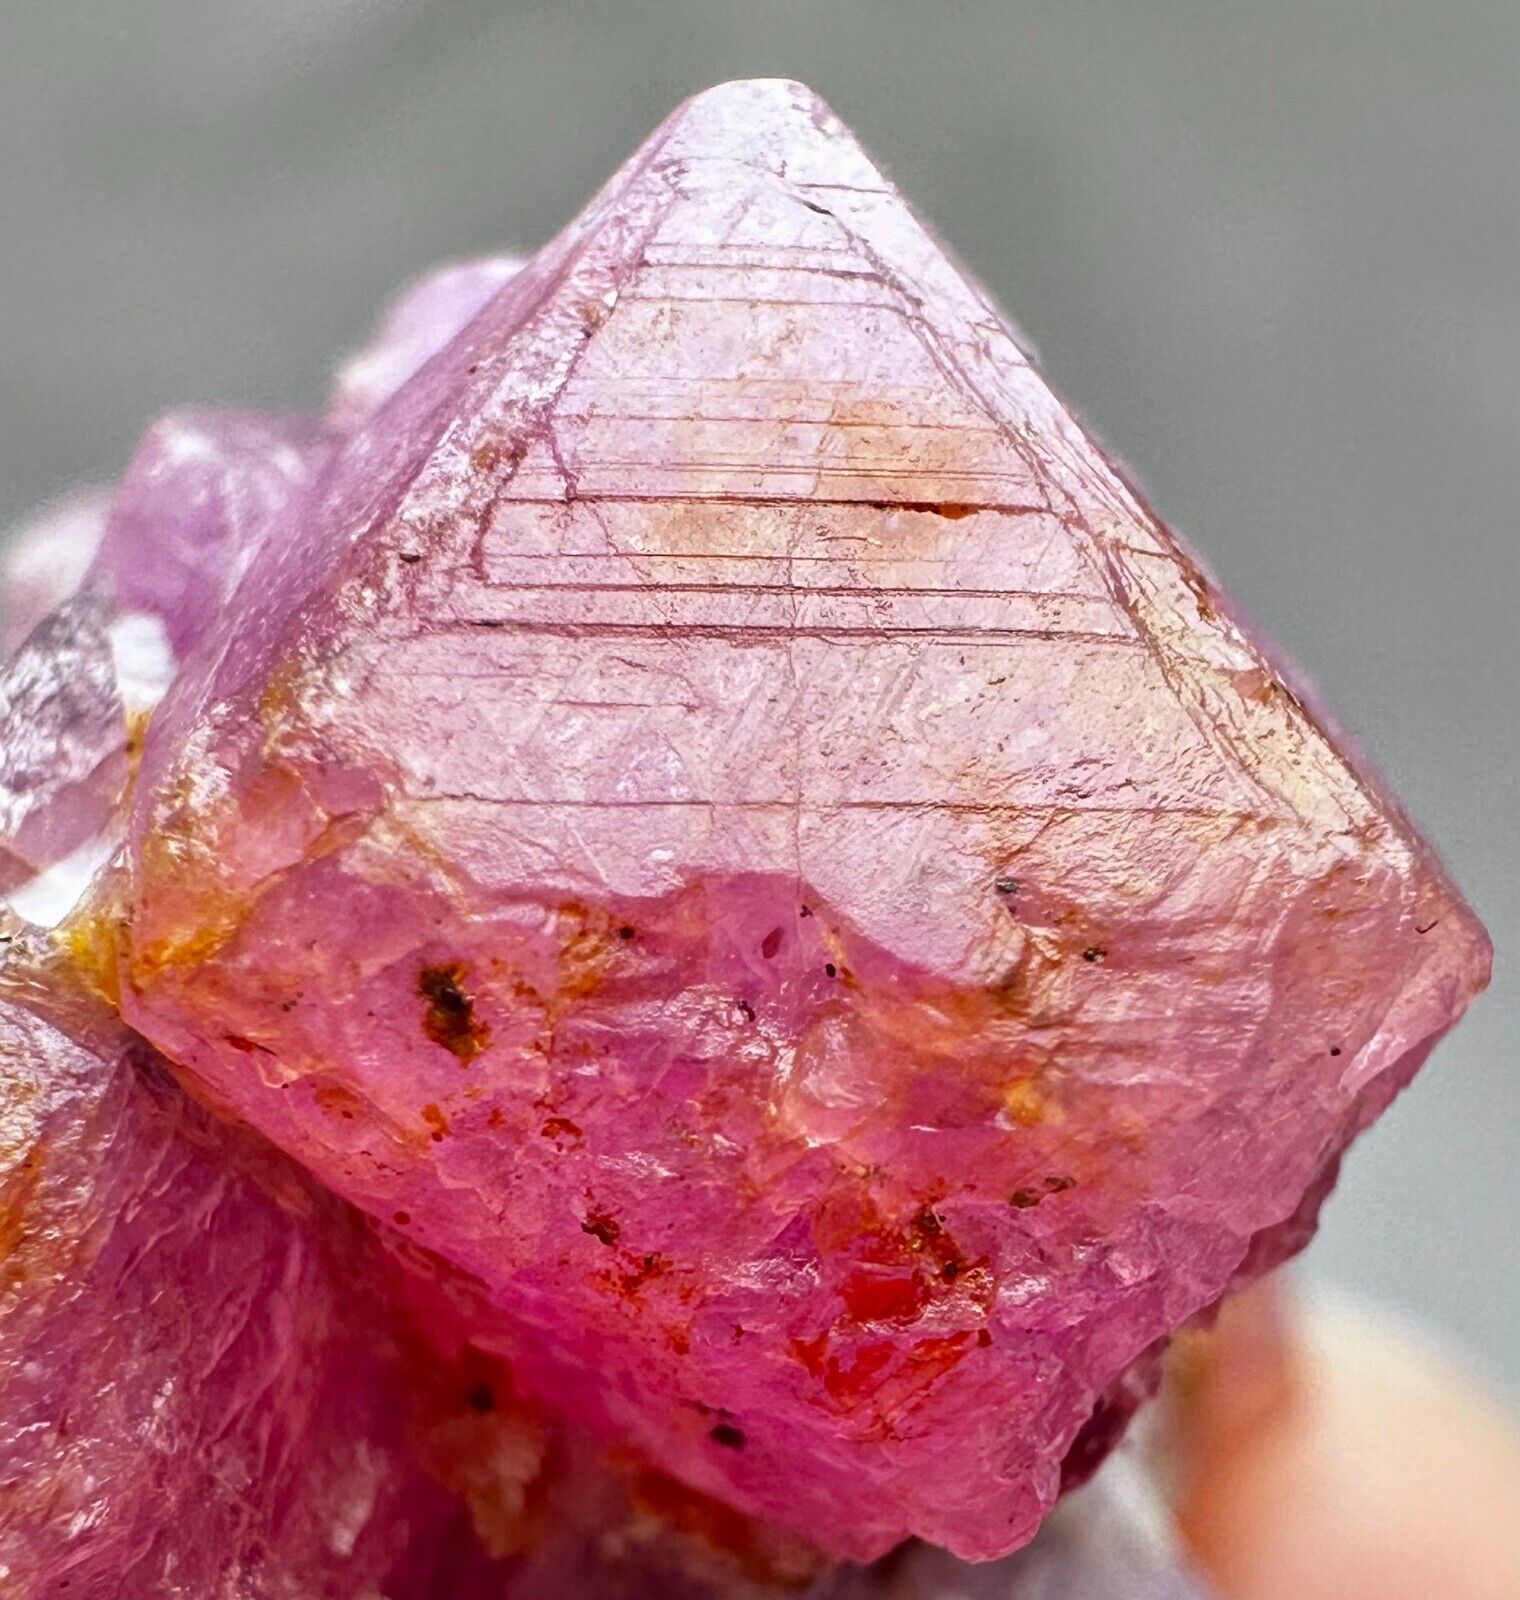 74 Ct Terminated Flower Shape Ruby With Mica Huge Crystals On Matrix @AFG